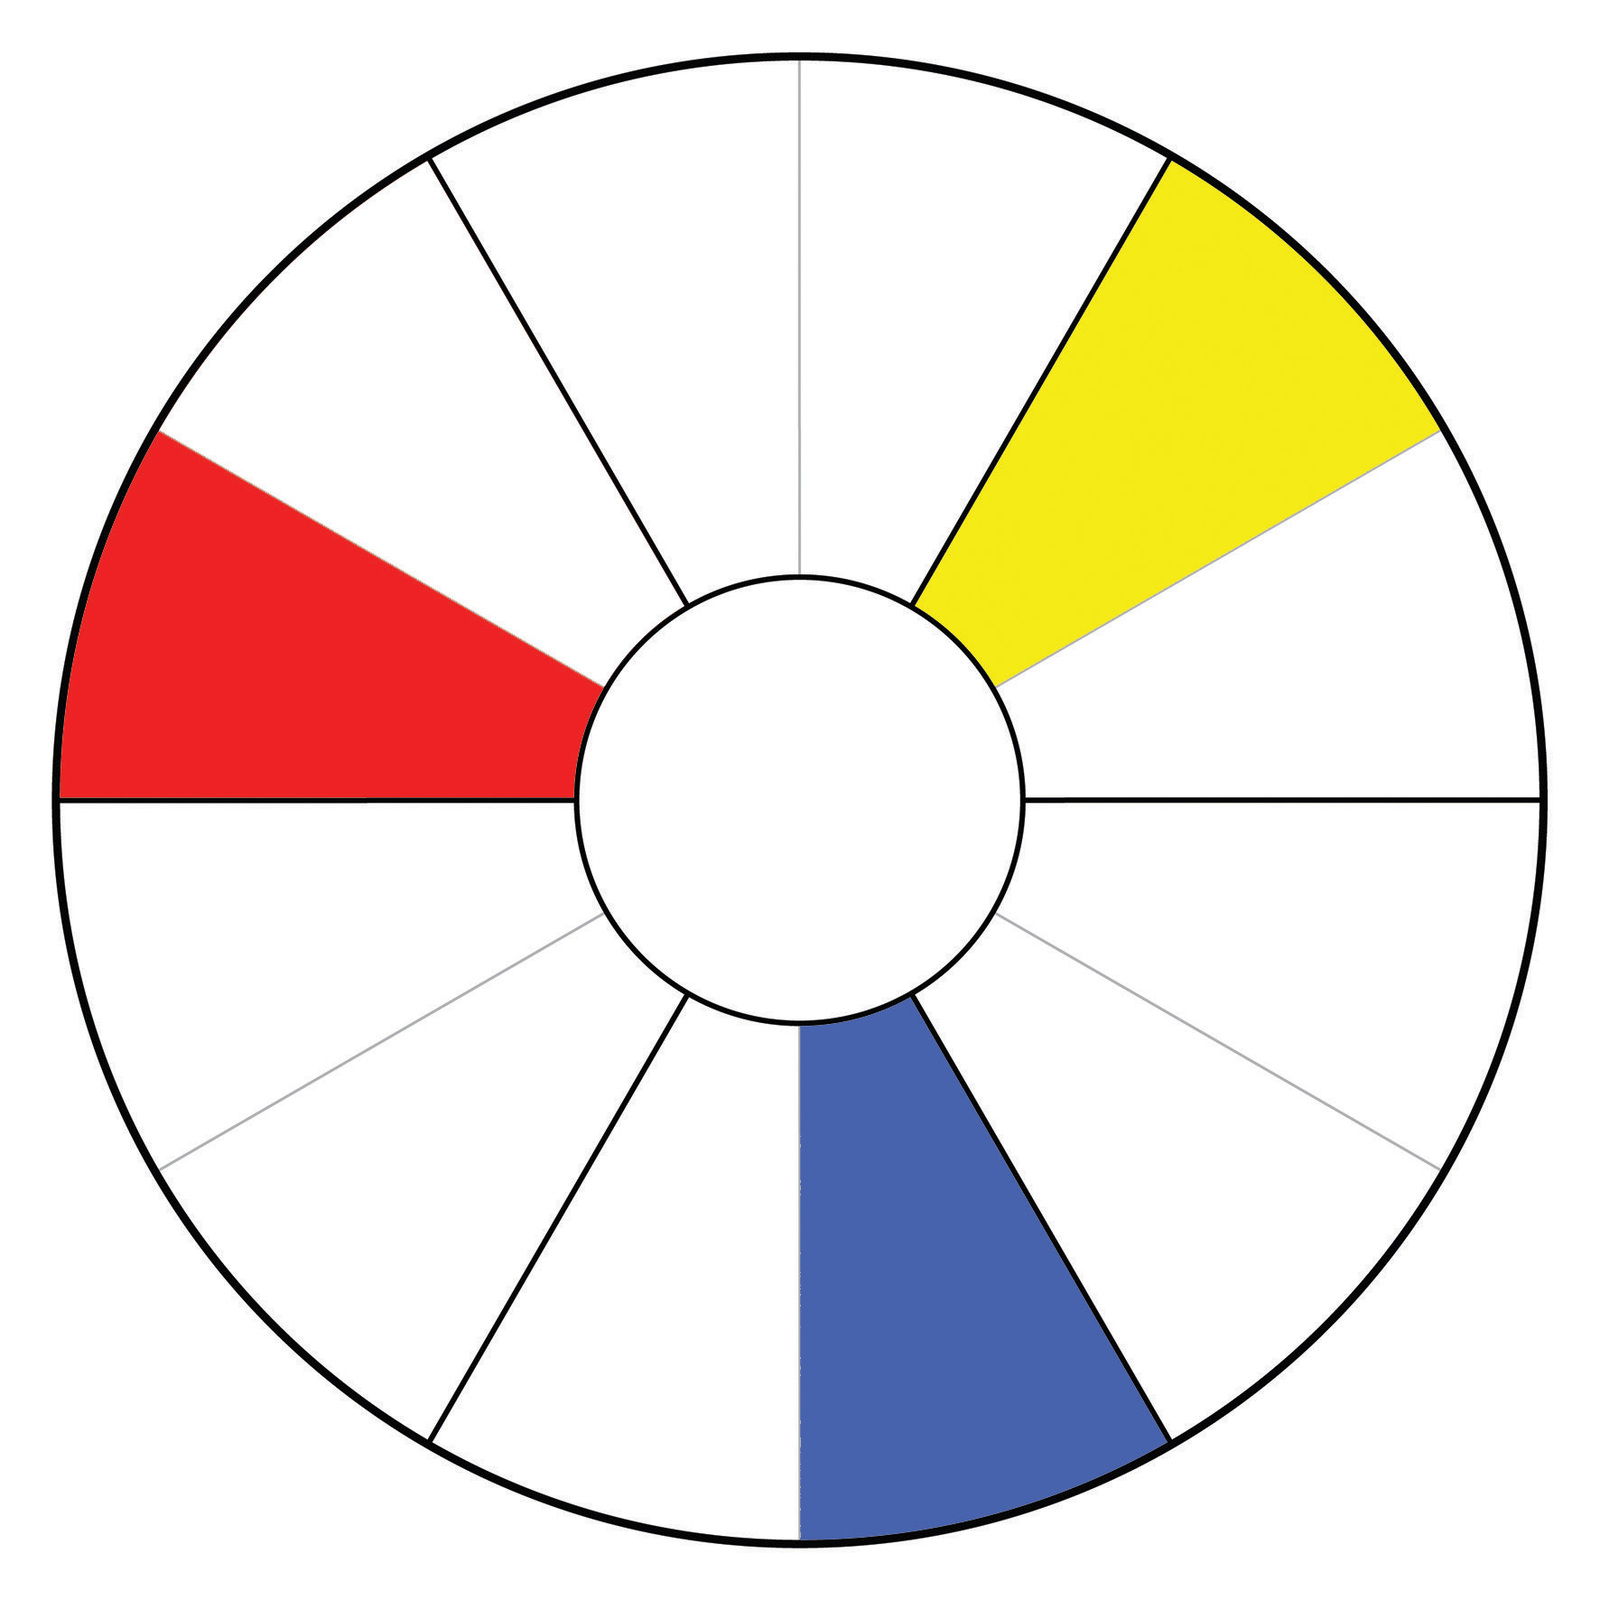 colour-wheel-template-for-primary-school-and-secondary-school-art-students